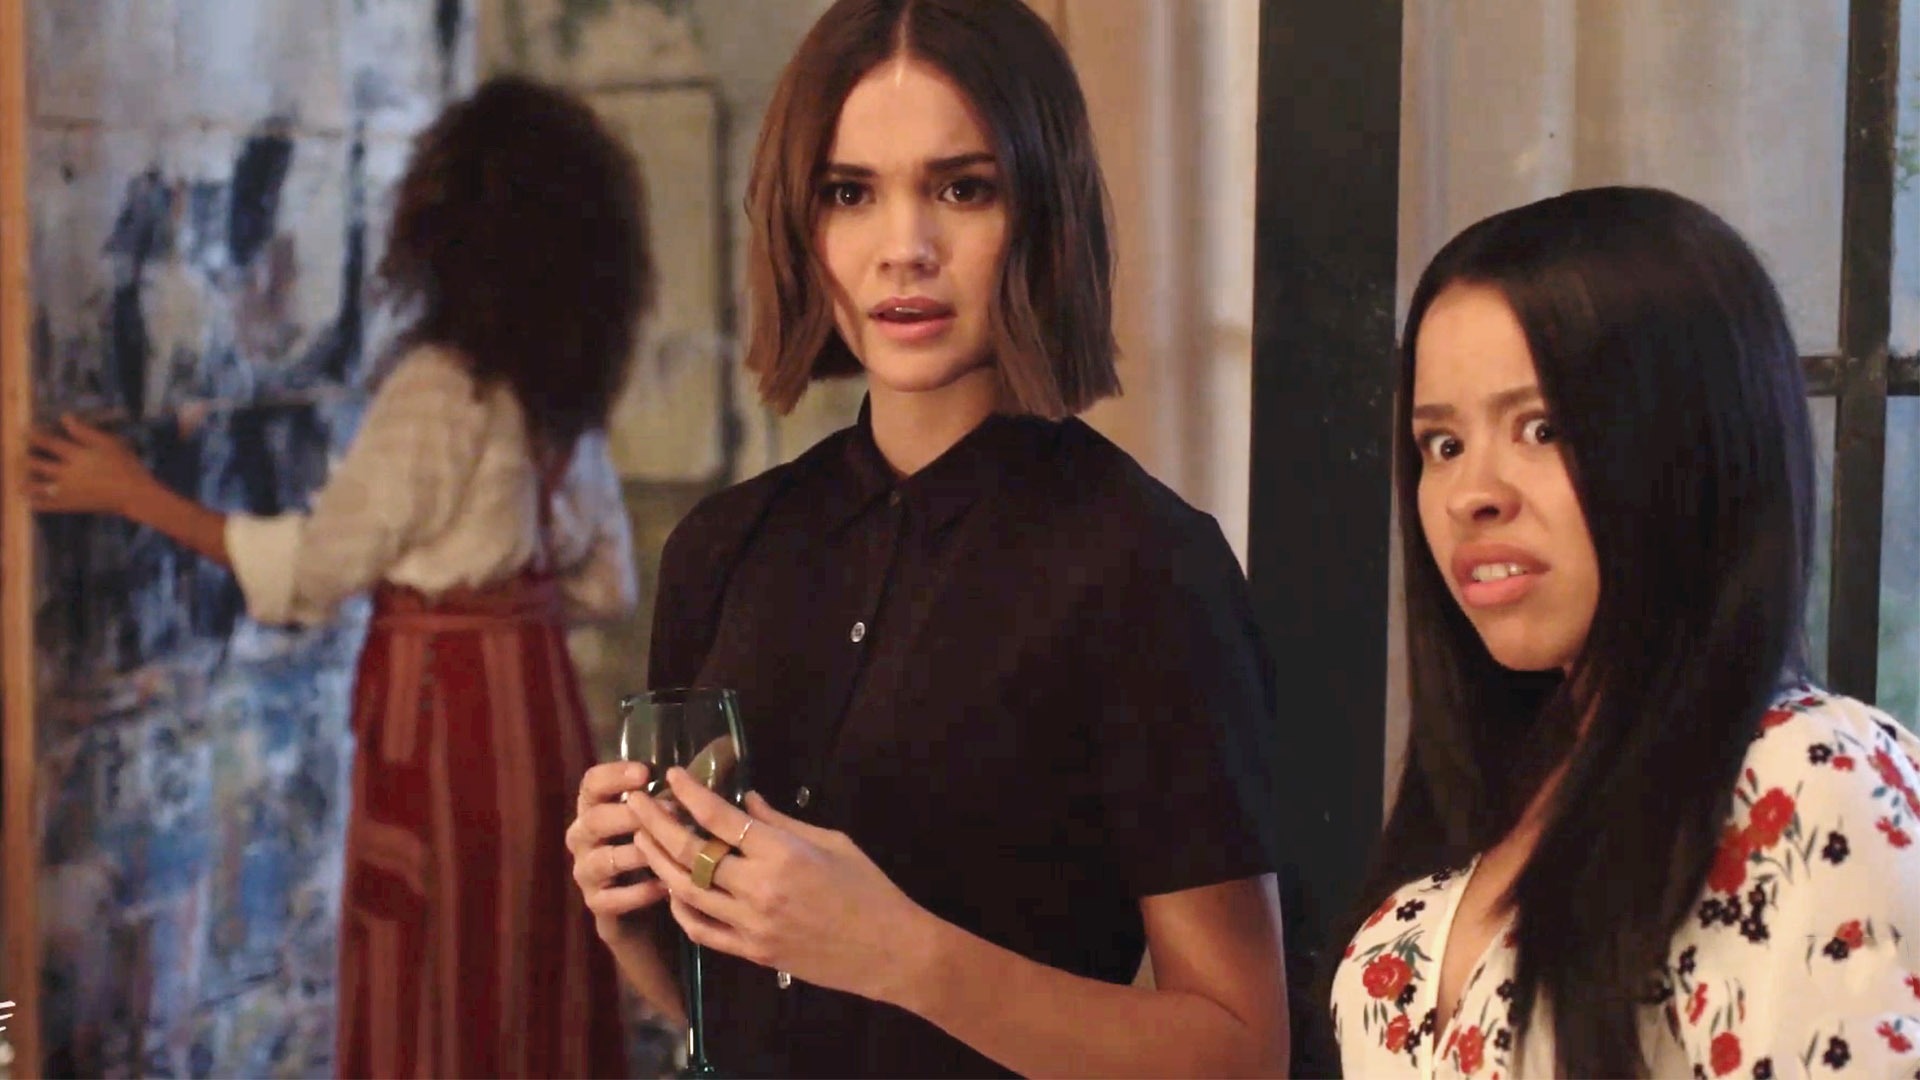 The Fosters Season 4 Premiere: Maia Mitchell on Callie's Latest Run in with  the Law - TV Guide